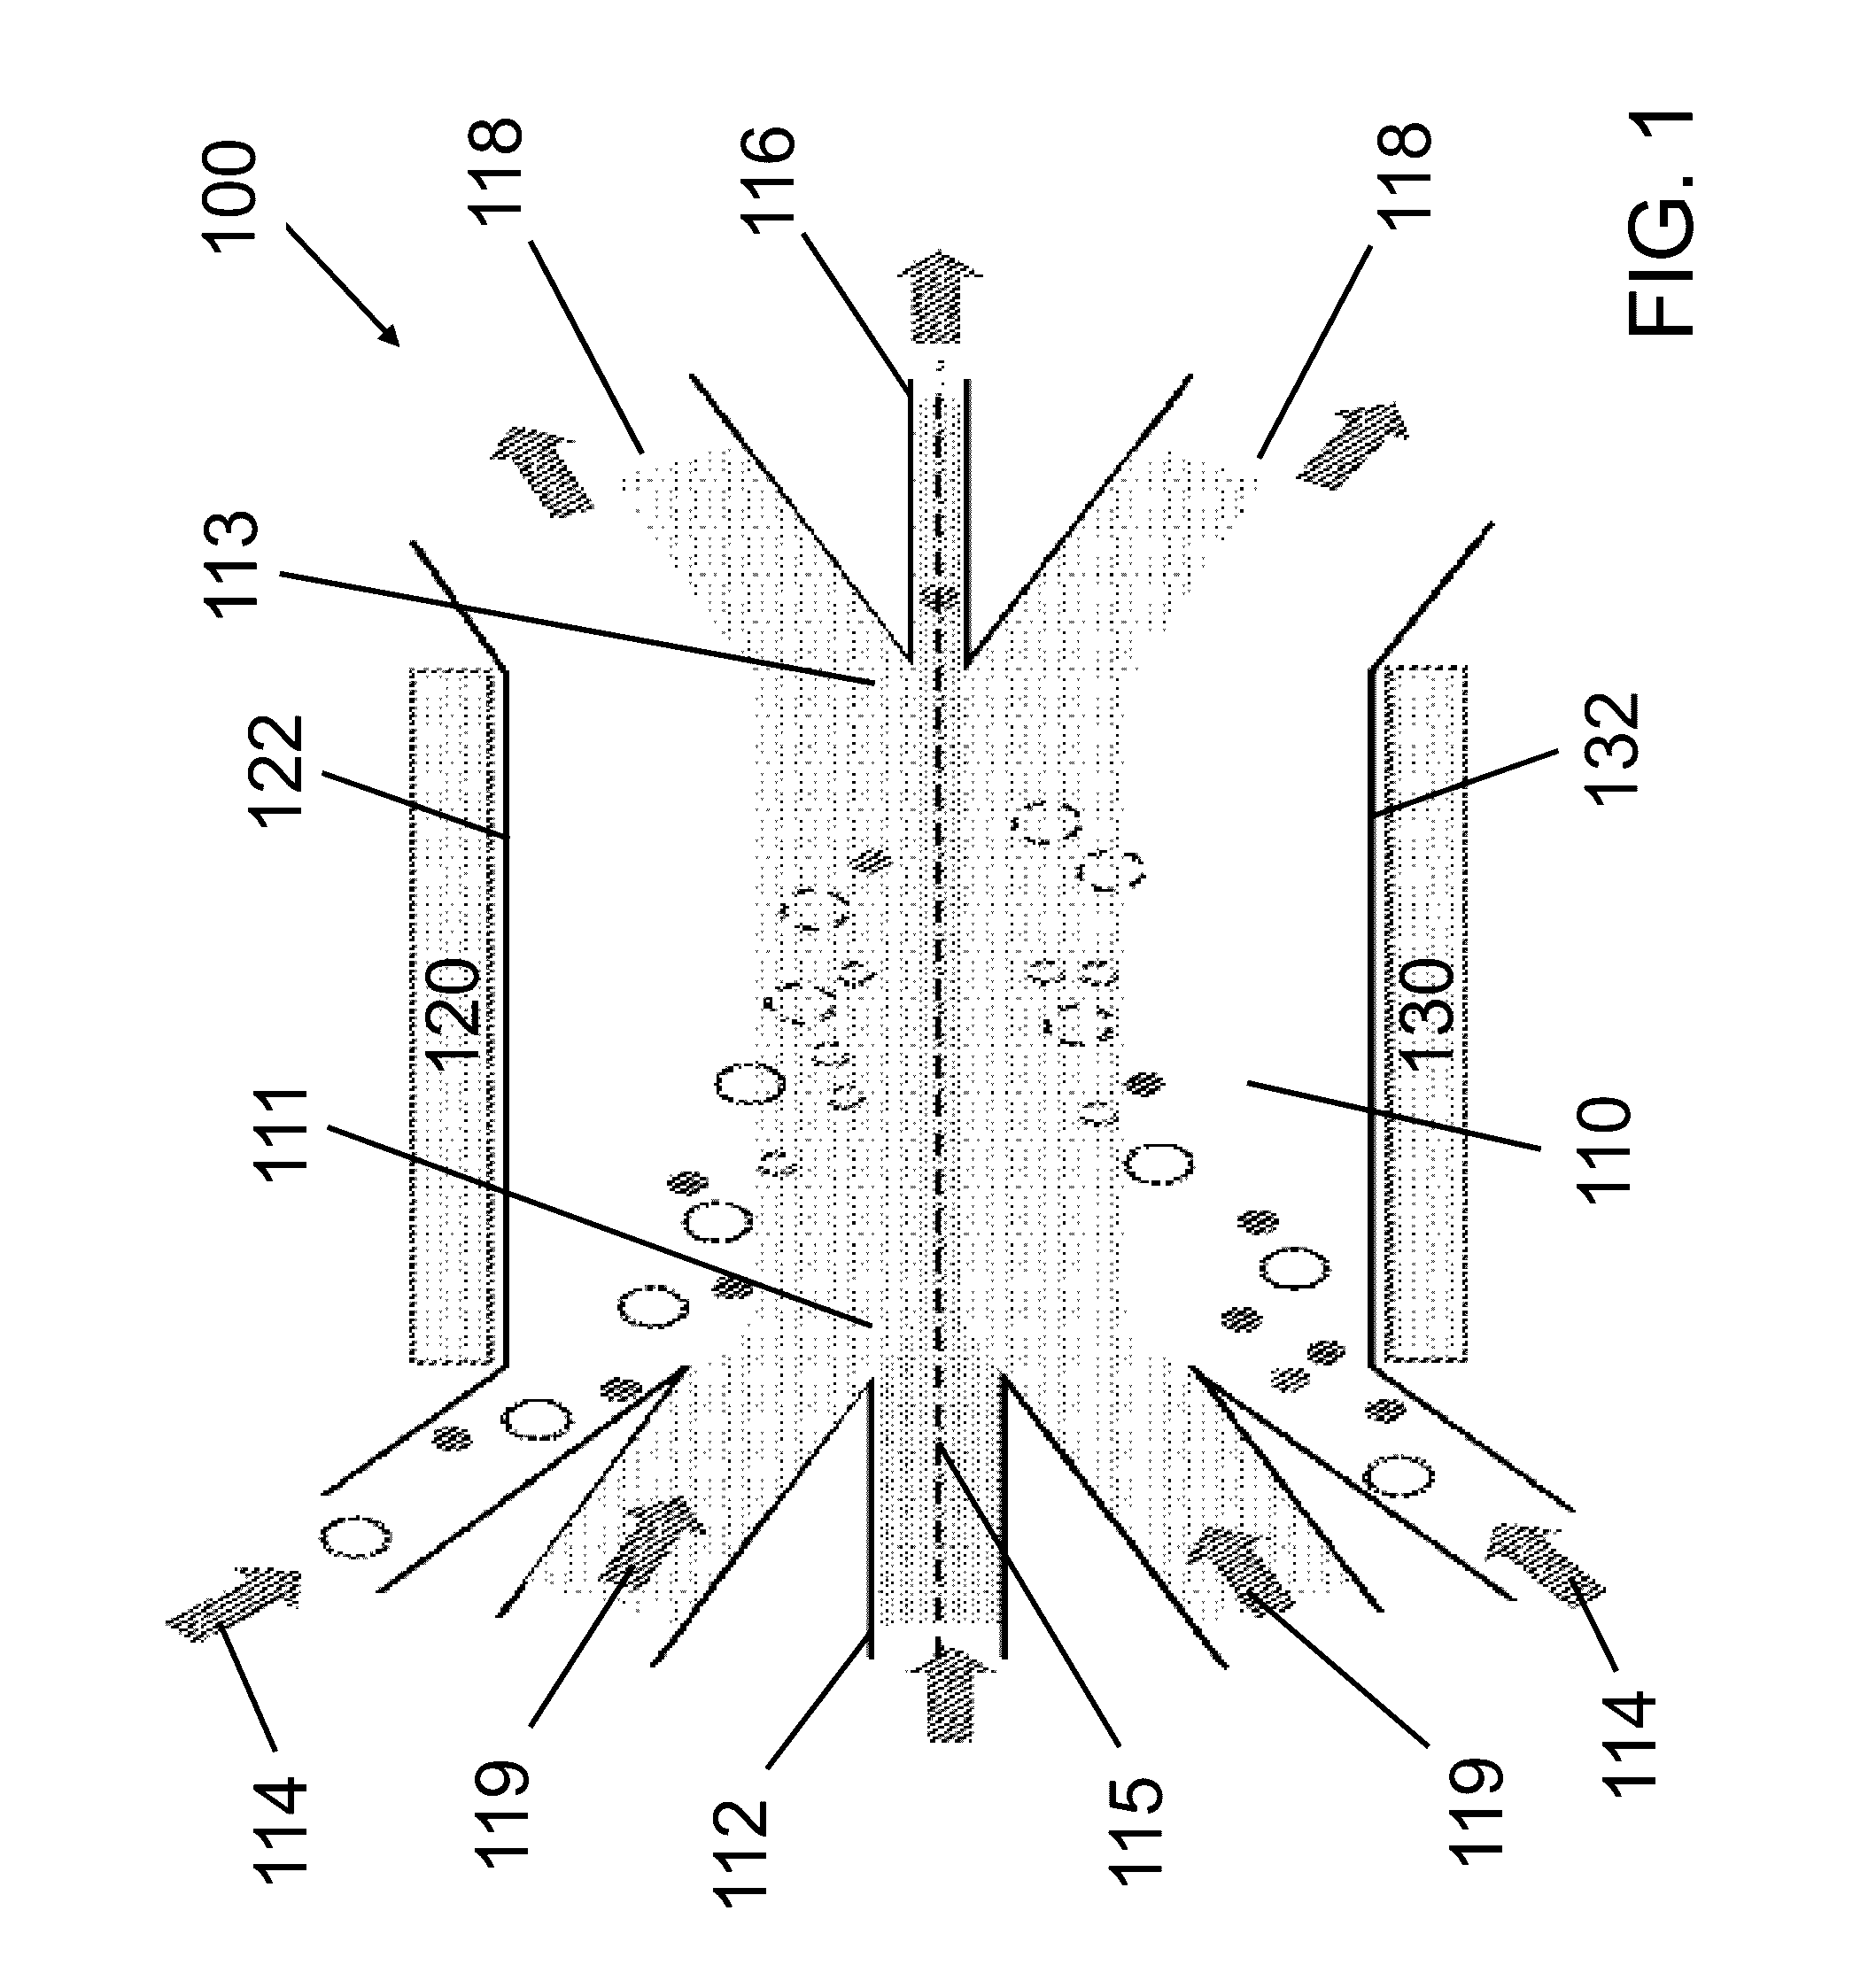 Acoustic methods for separation of cells and pathogens